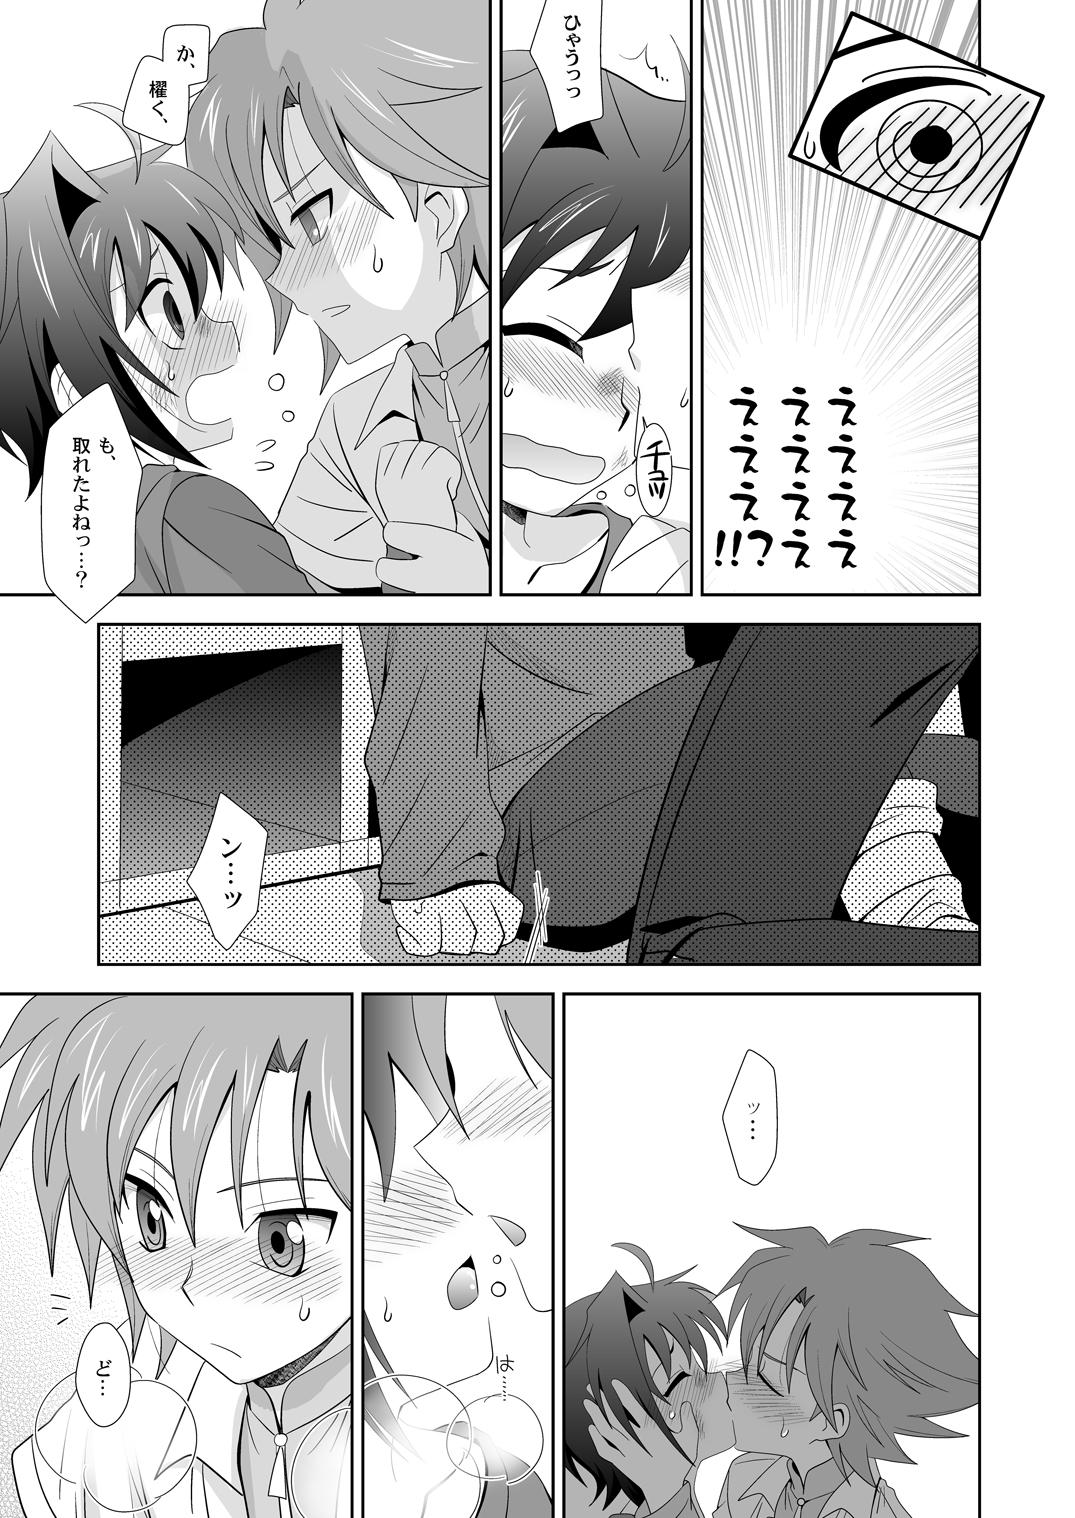 Black Thugs Yuuyake to Coppepan - Cardfight vanguard Submissive - Page 6